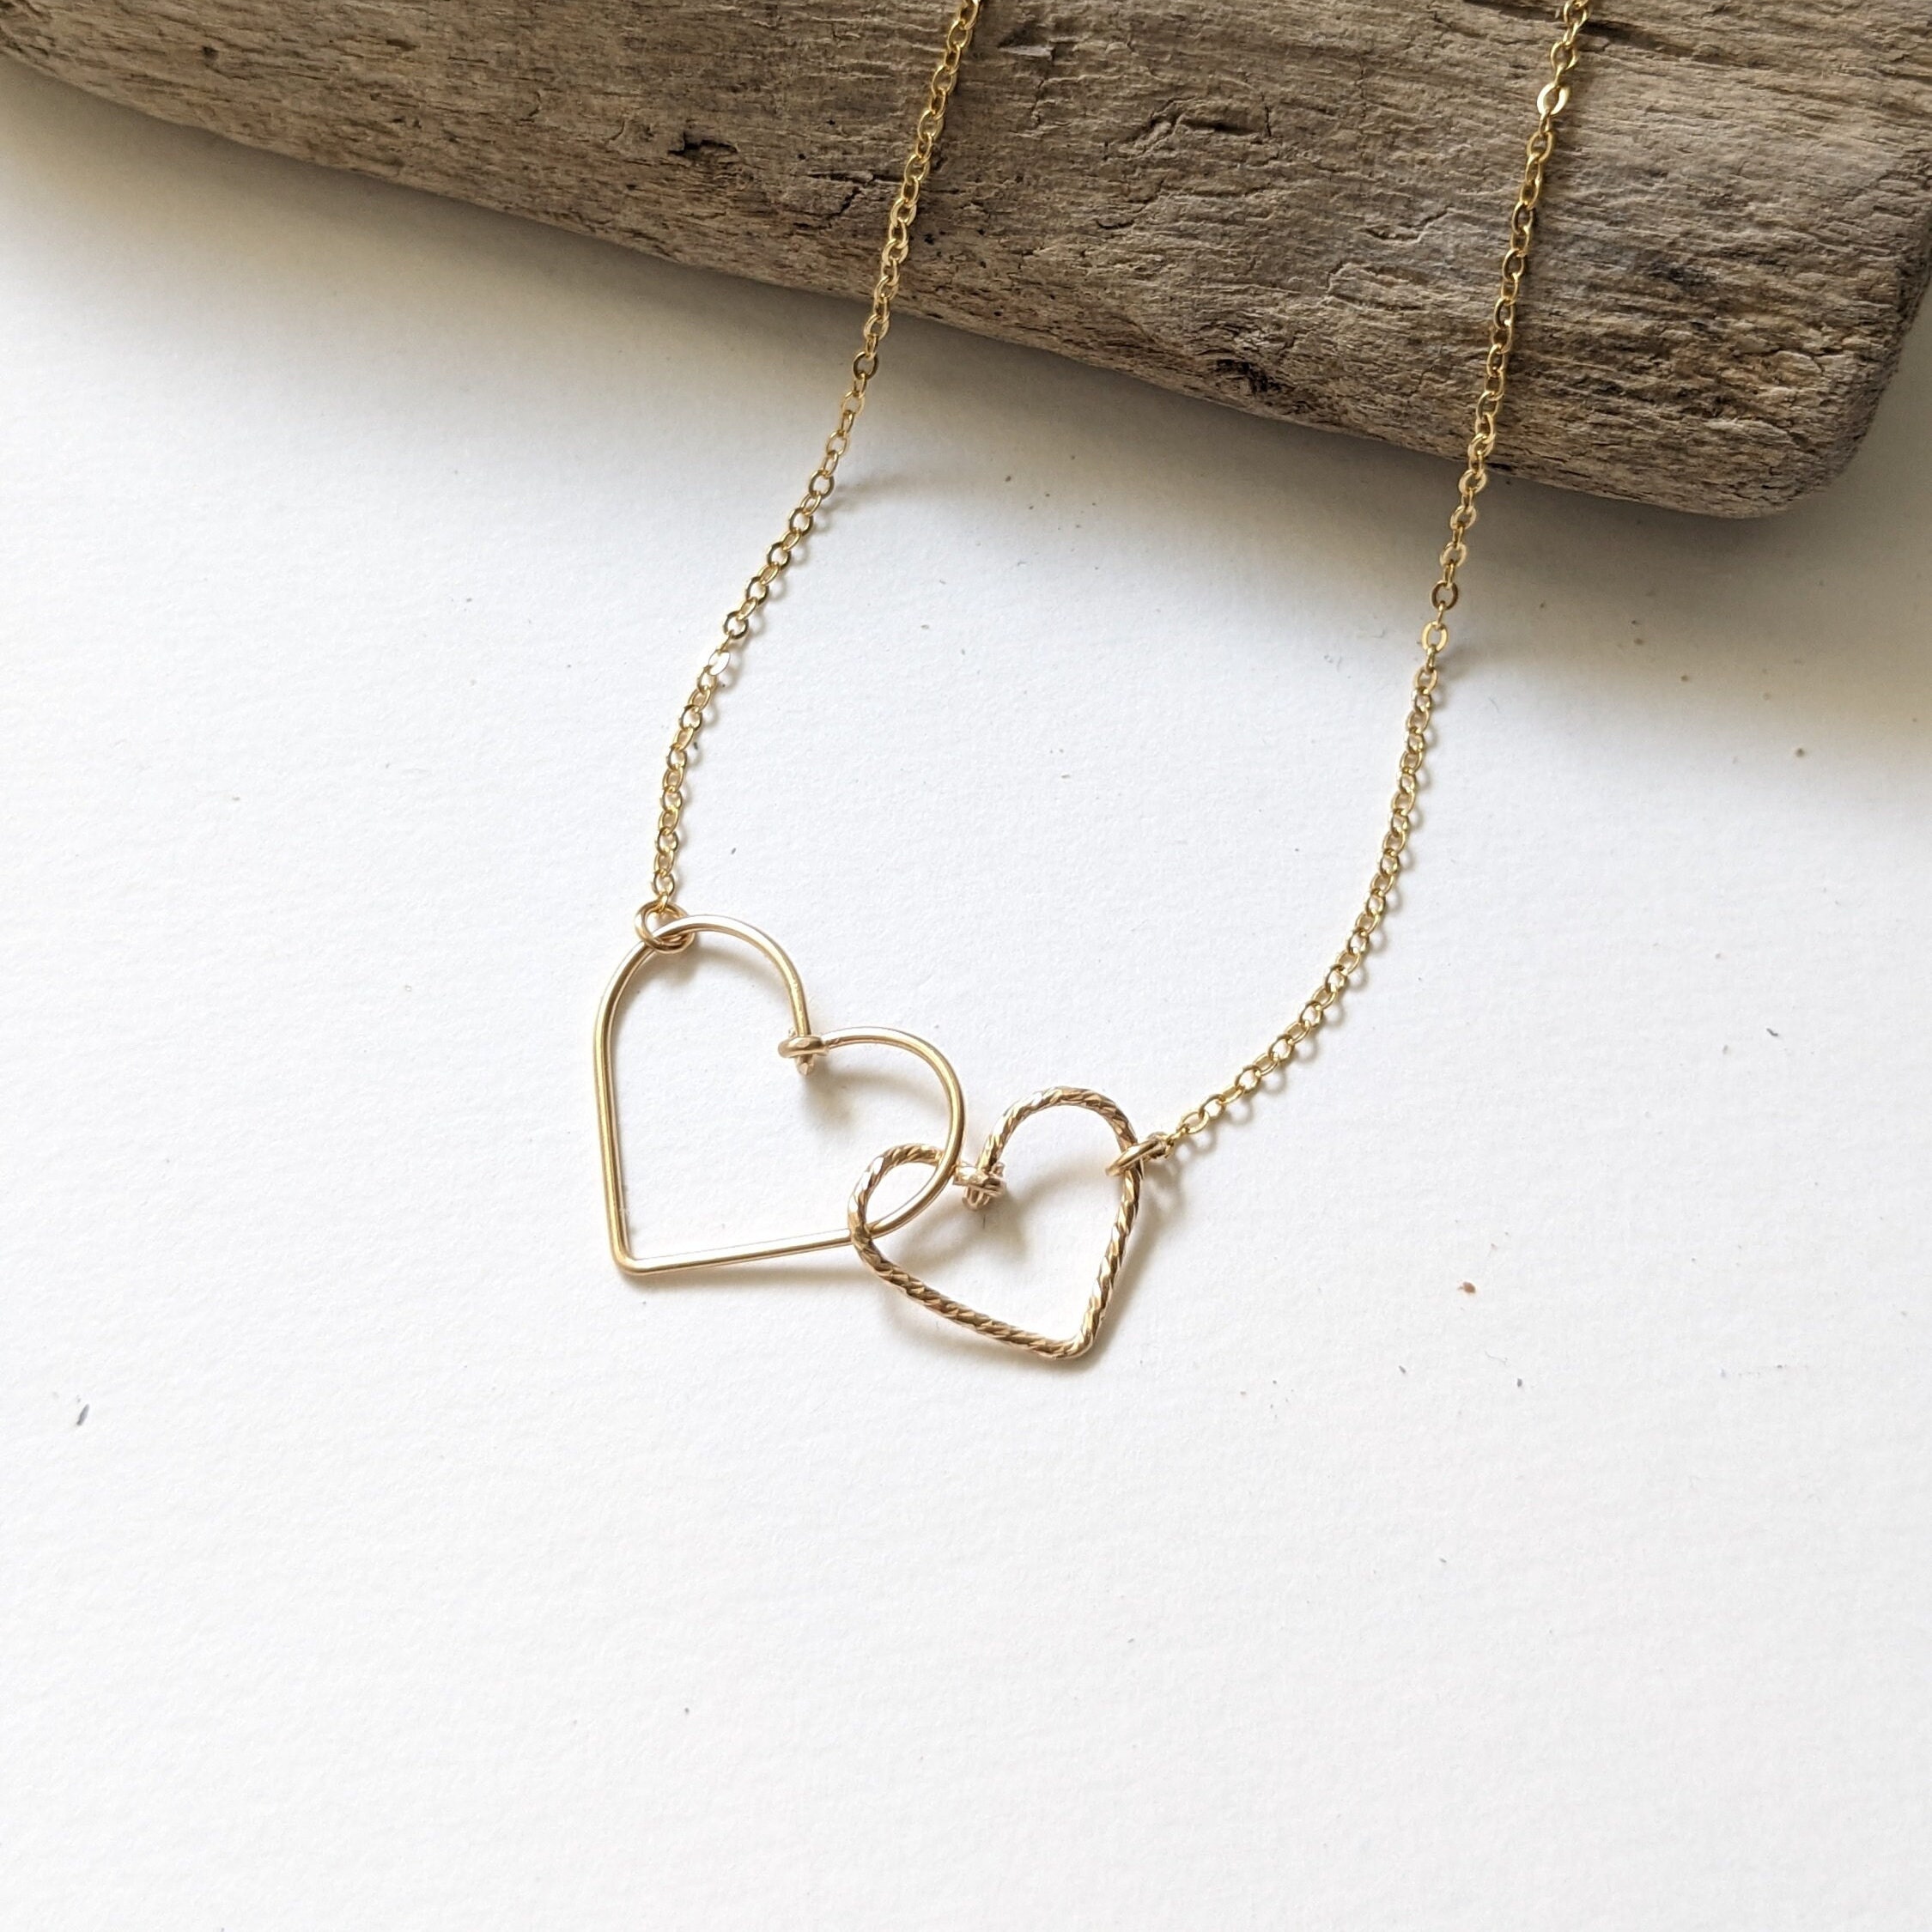 Engraved 1-5 Intertwined Hearts Necklace - GetNameNecklace